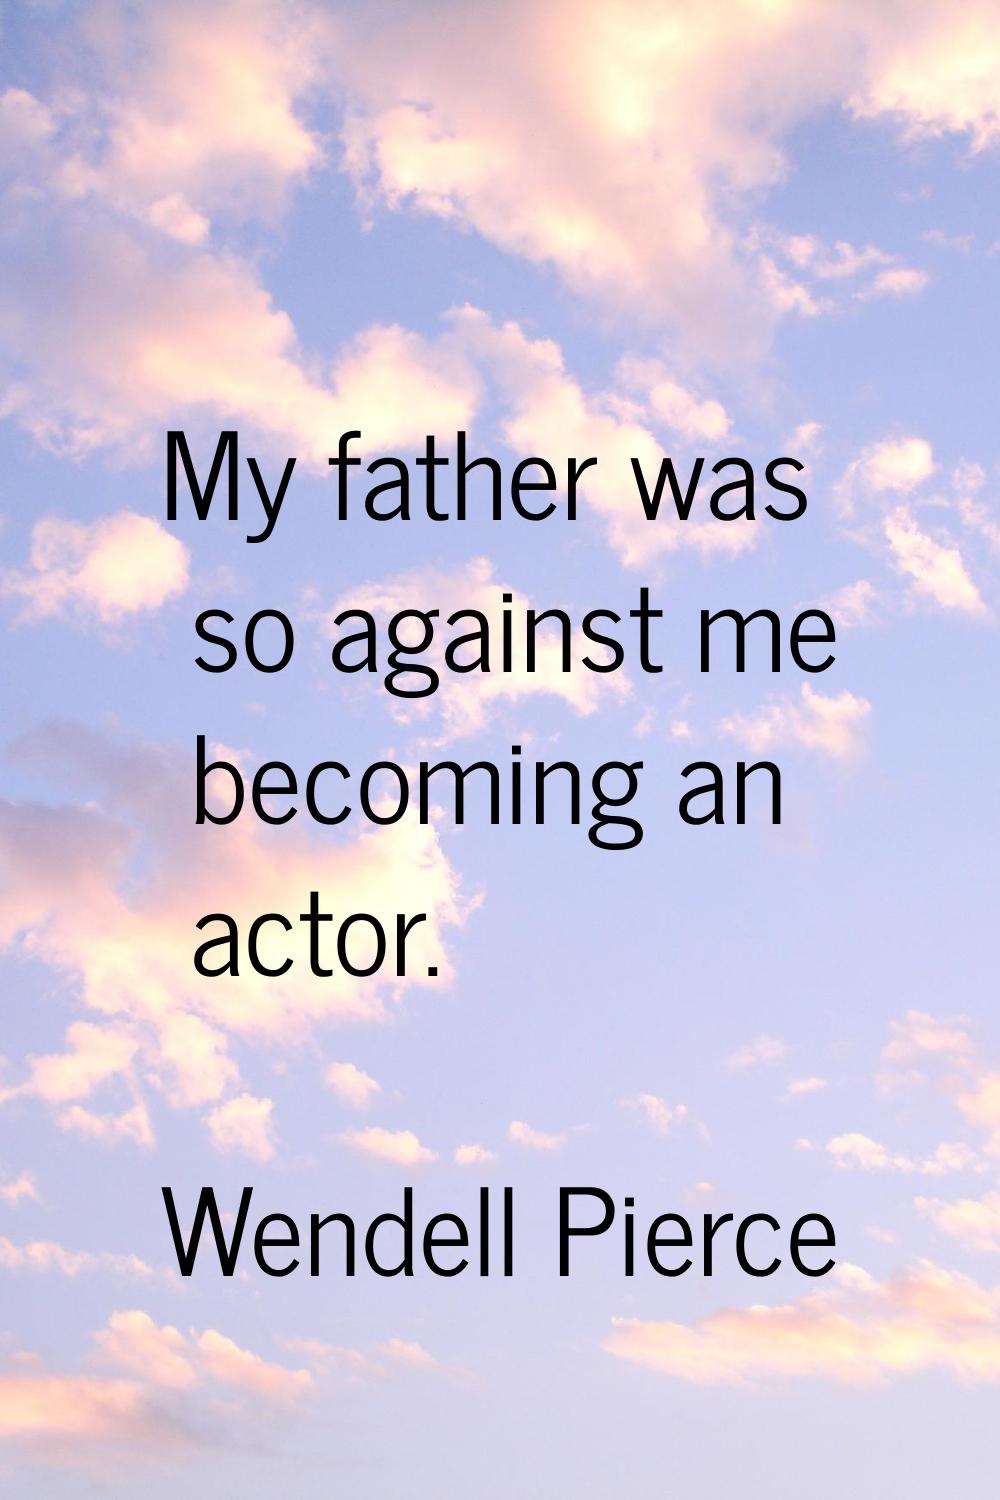 My father was so against me becoming an actor.